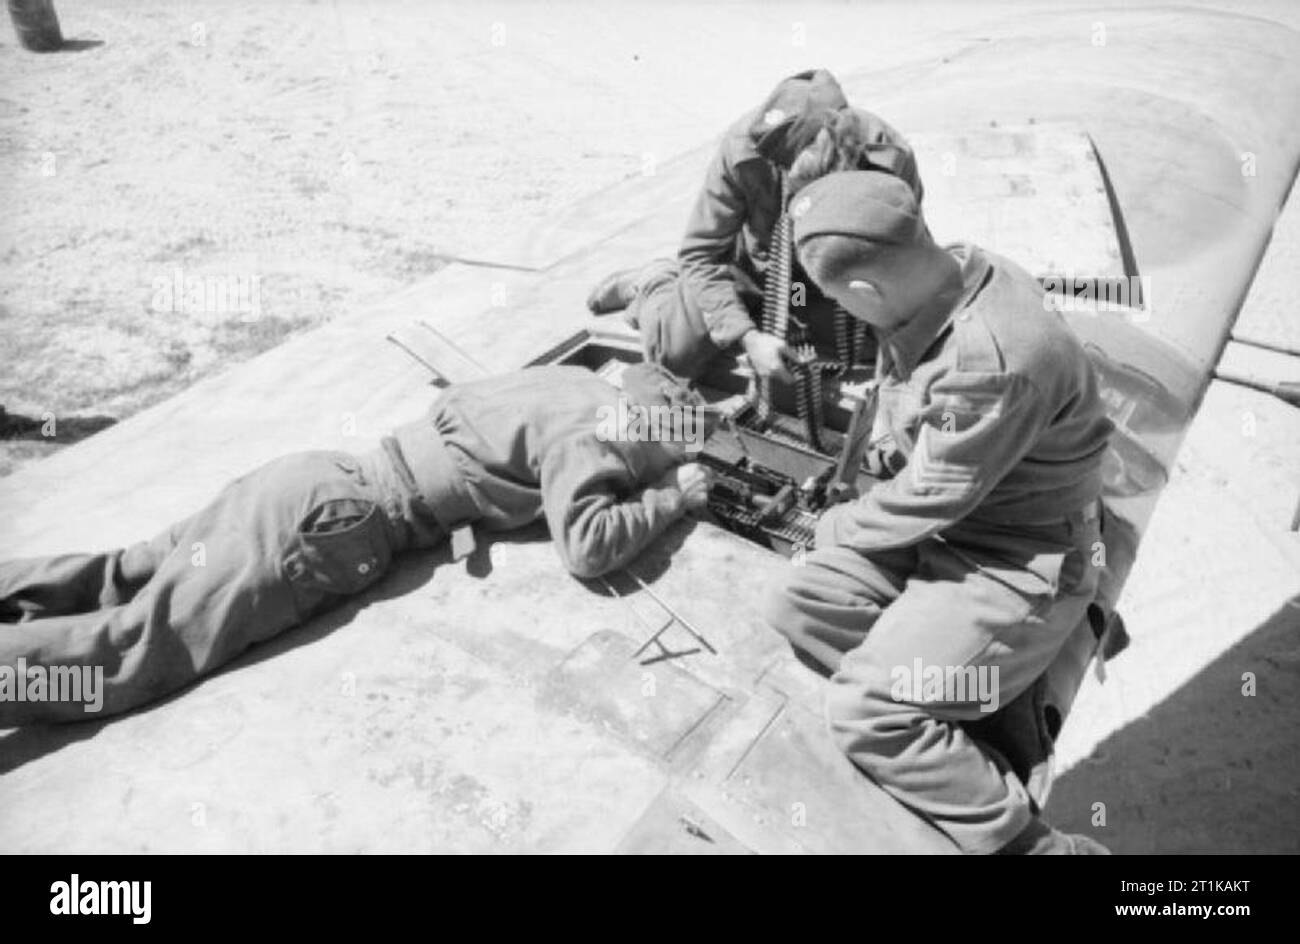 Royal Air Force Operations in the Middle East and North Africa, 1939-1943. Armourers of No. 89 Squadron RAF aligning and loading .303 Browning machine guns in the wing of a Bristol Beaufighter Mark VIF, before the firing butts at Castel Benito, Libya. Stock Photo